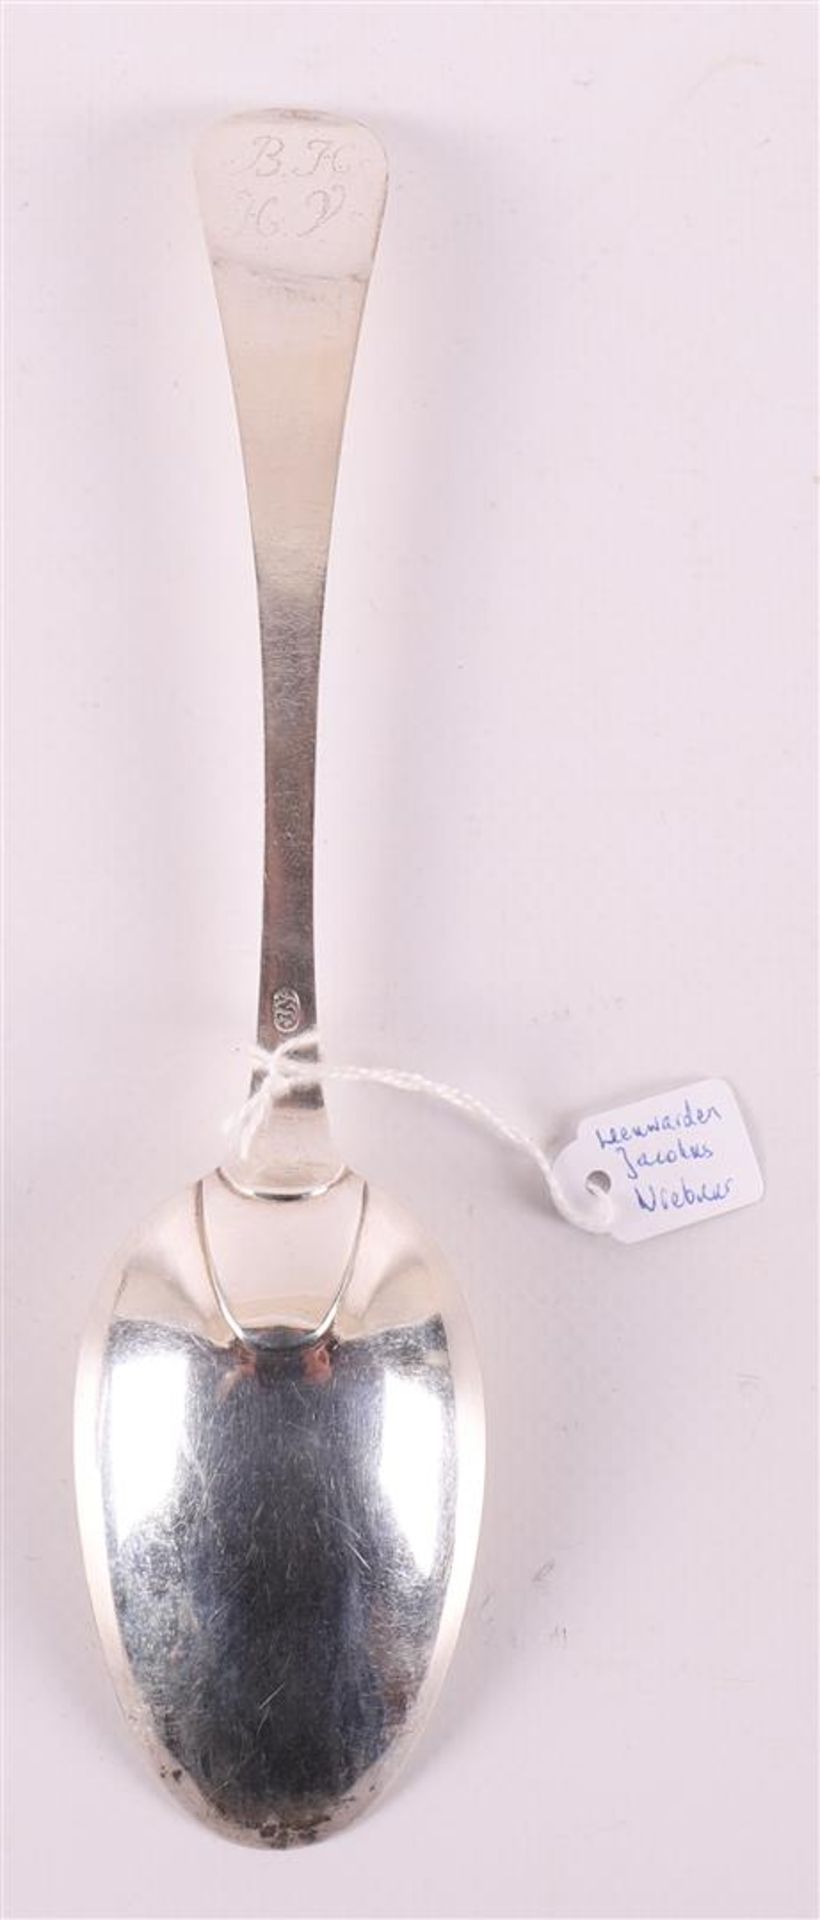 Four first grade content 925/1000 silver spoons, Friesland, Leeuwarden, - Image 6 of 7